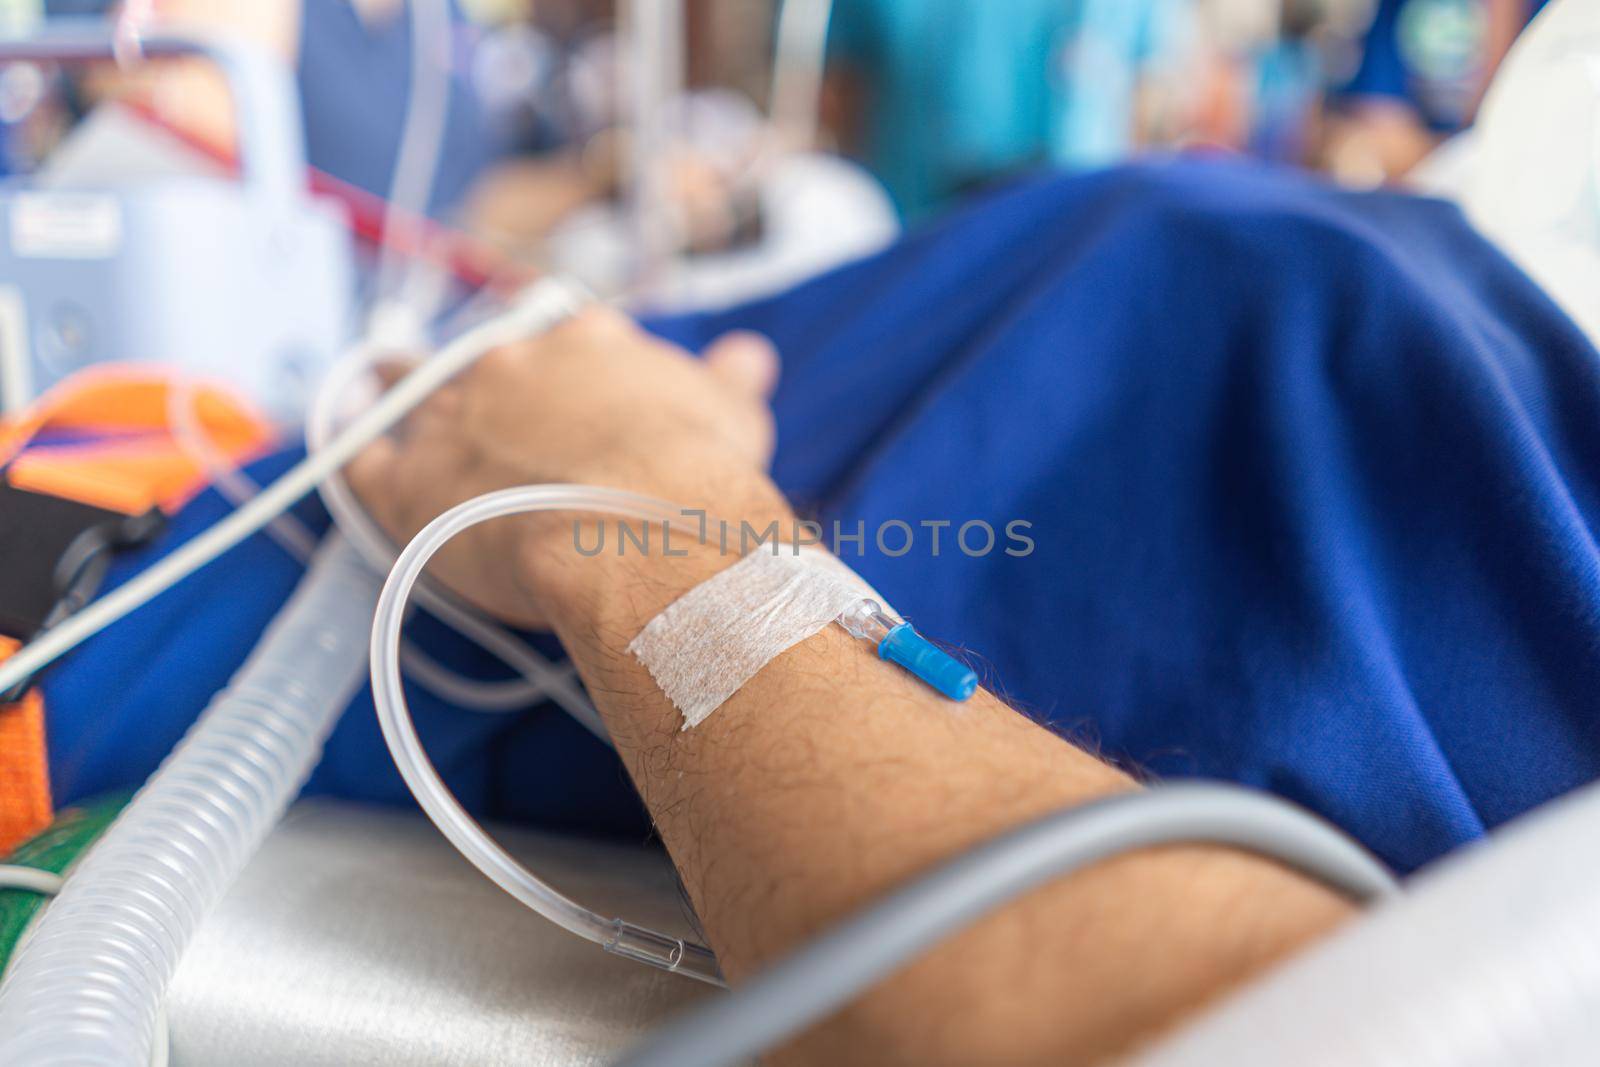 A close-up picture of a patient hand taking saline solution by sandyman